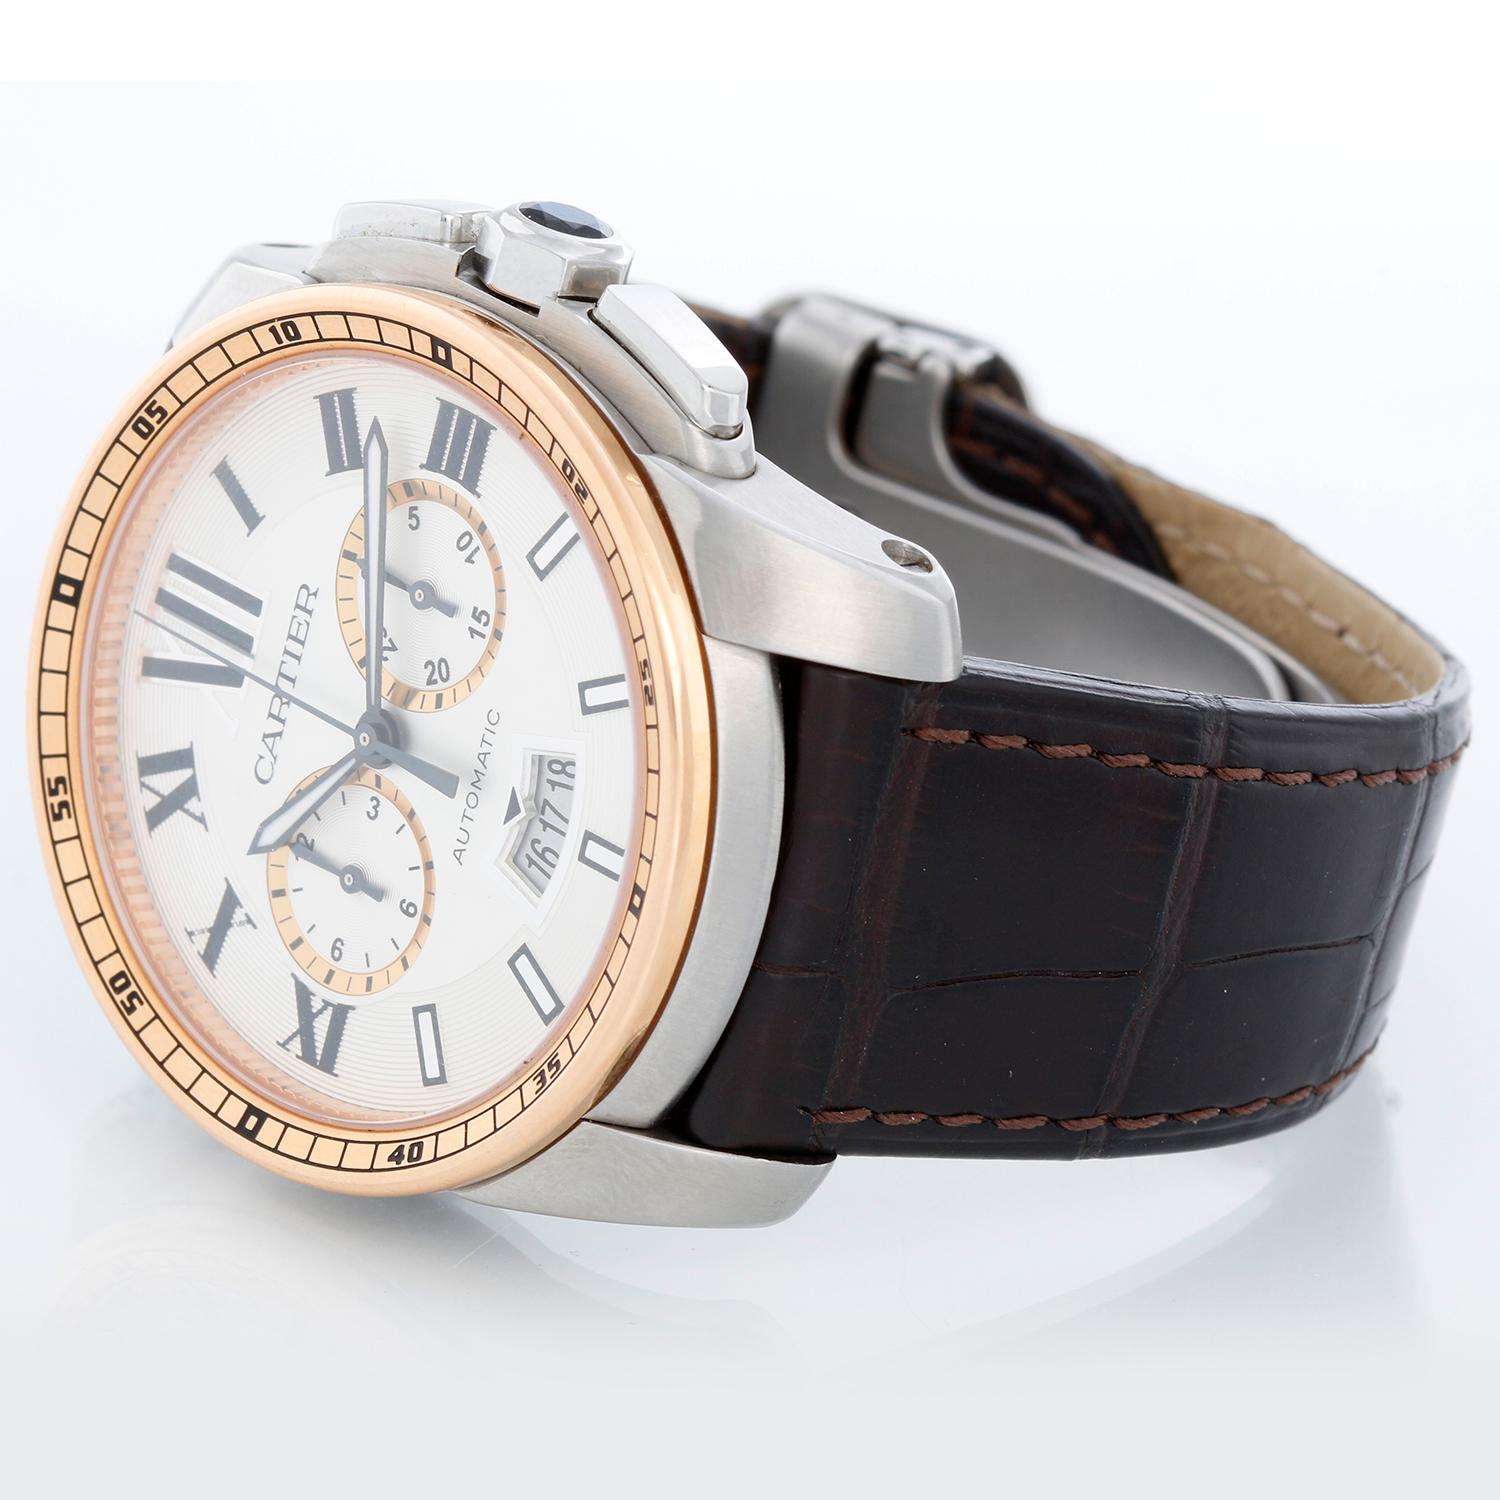 Cartier Calibre Stainless Steel & Rose Gold Men's 42mm Watch W7100043 3578 - Automatic winding; Chronograph . Stainless steel case with rose gold bezel; exposition back  (42mm diameter). Silver dial with Roman numerals; subdials; date at 6 o'clock.